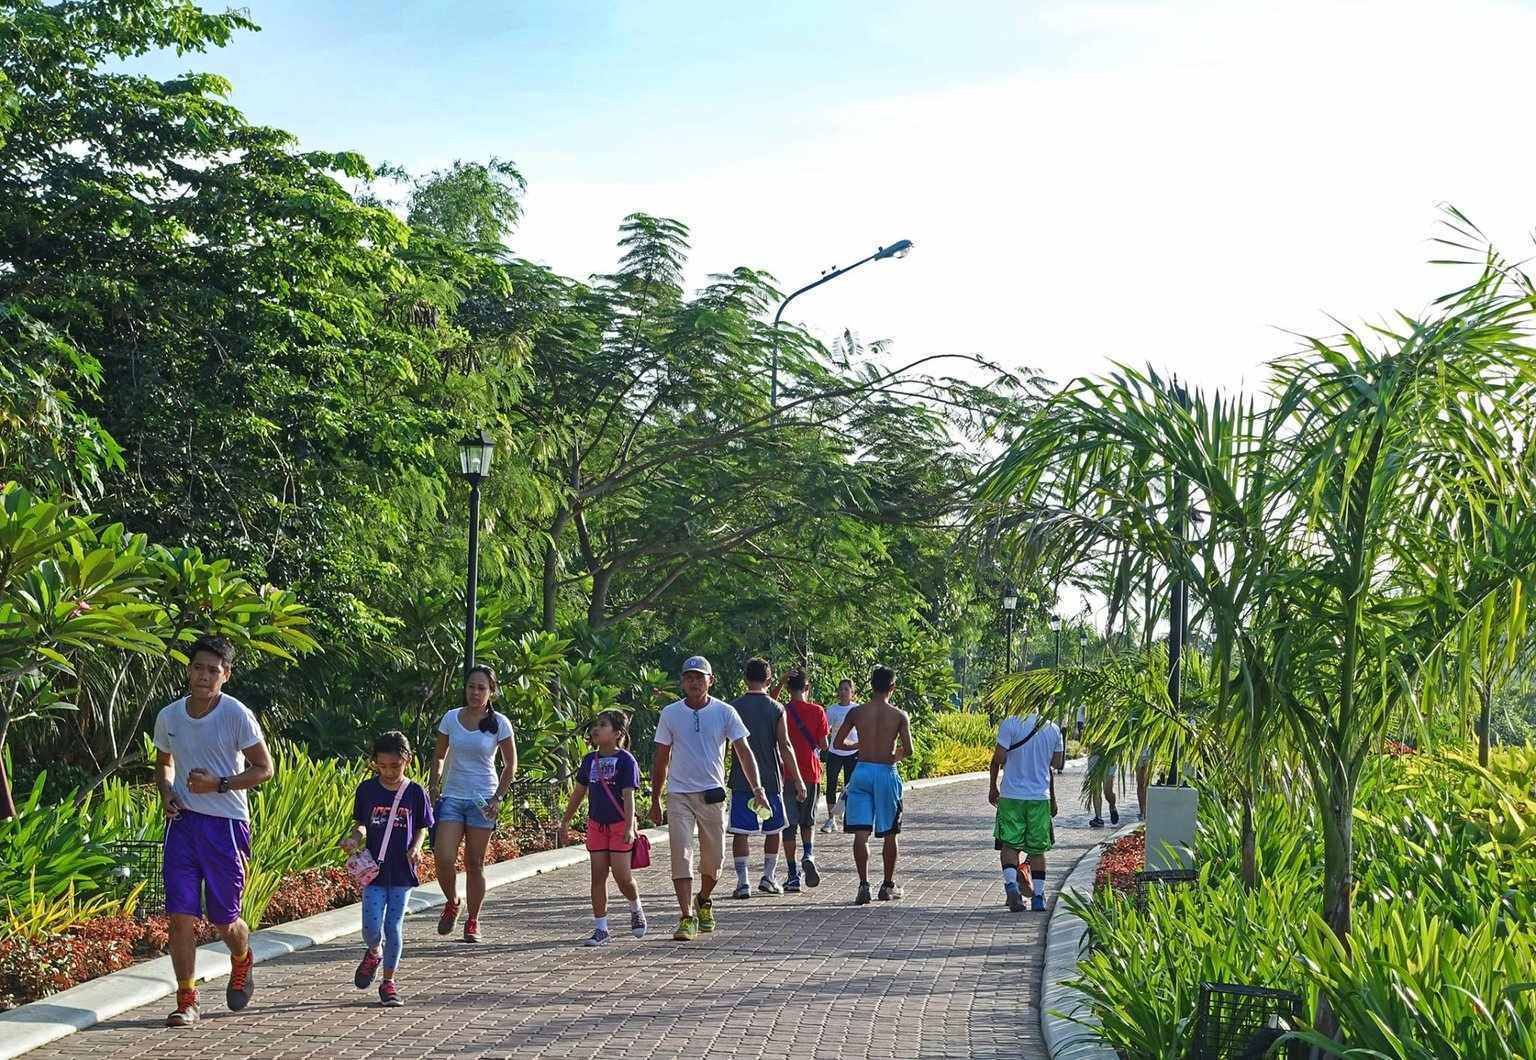 Iloilo officials mull opening scenic River Esplanade to cyclists